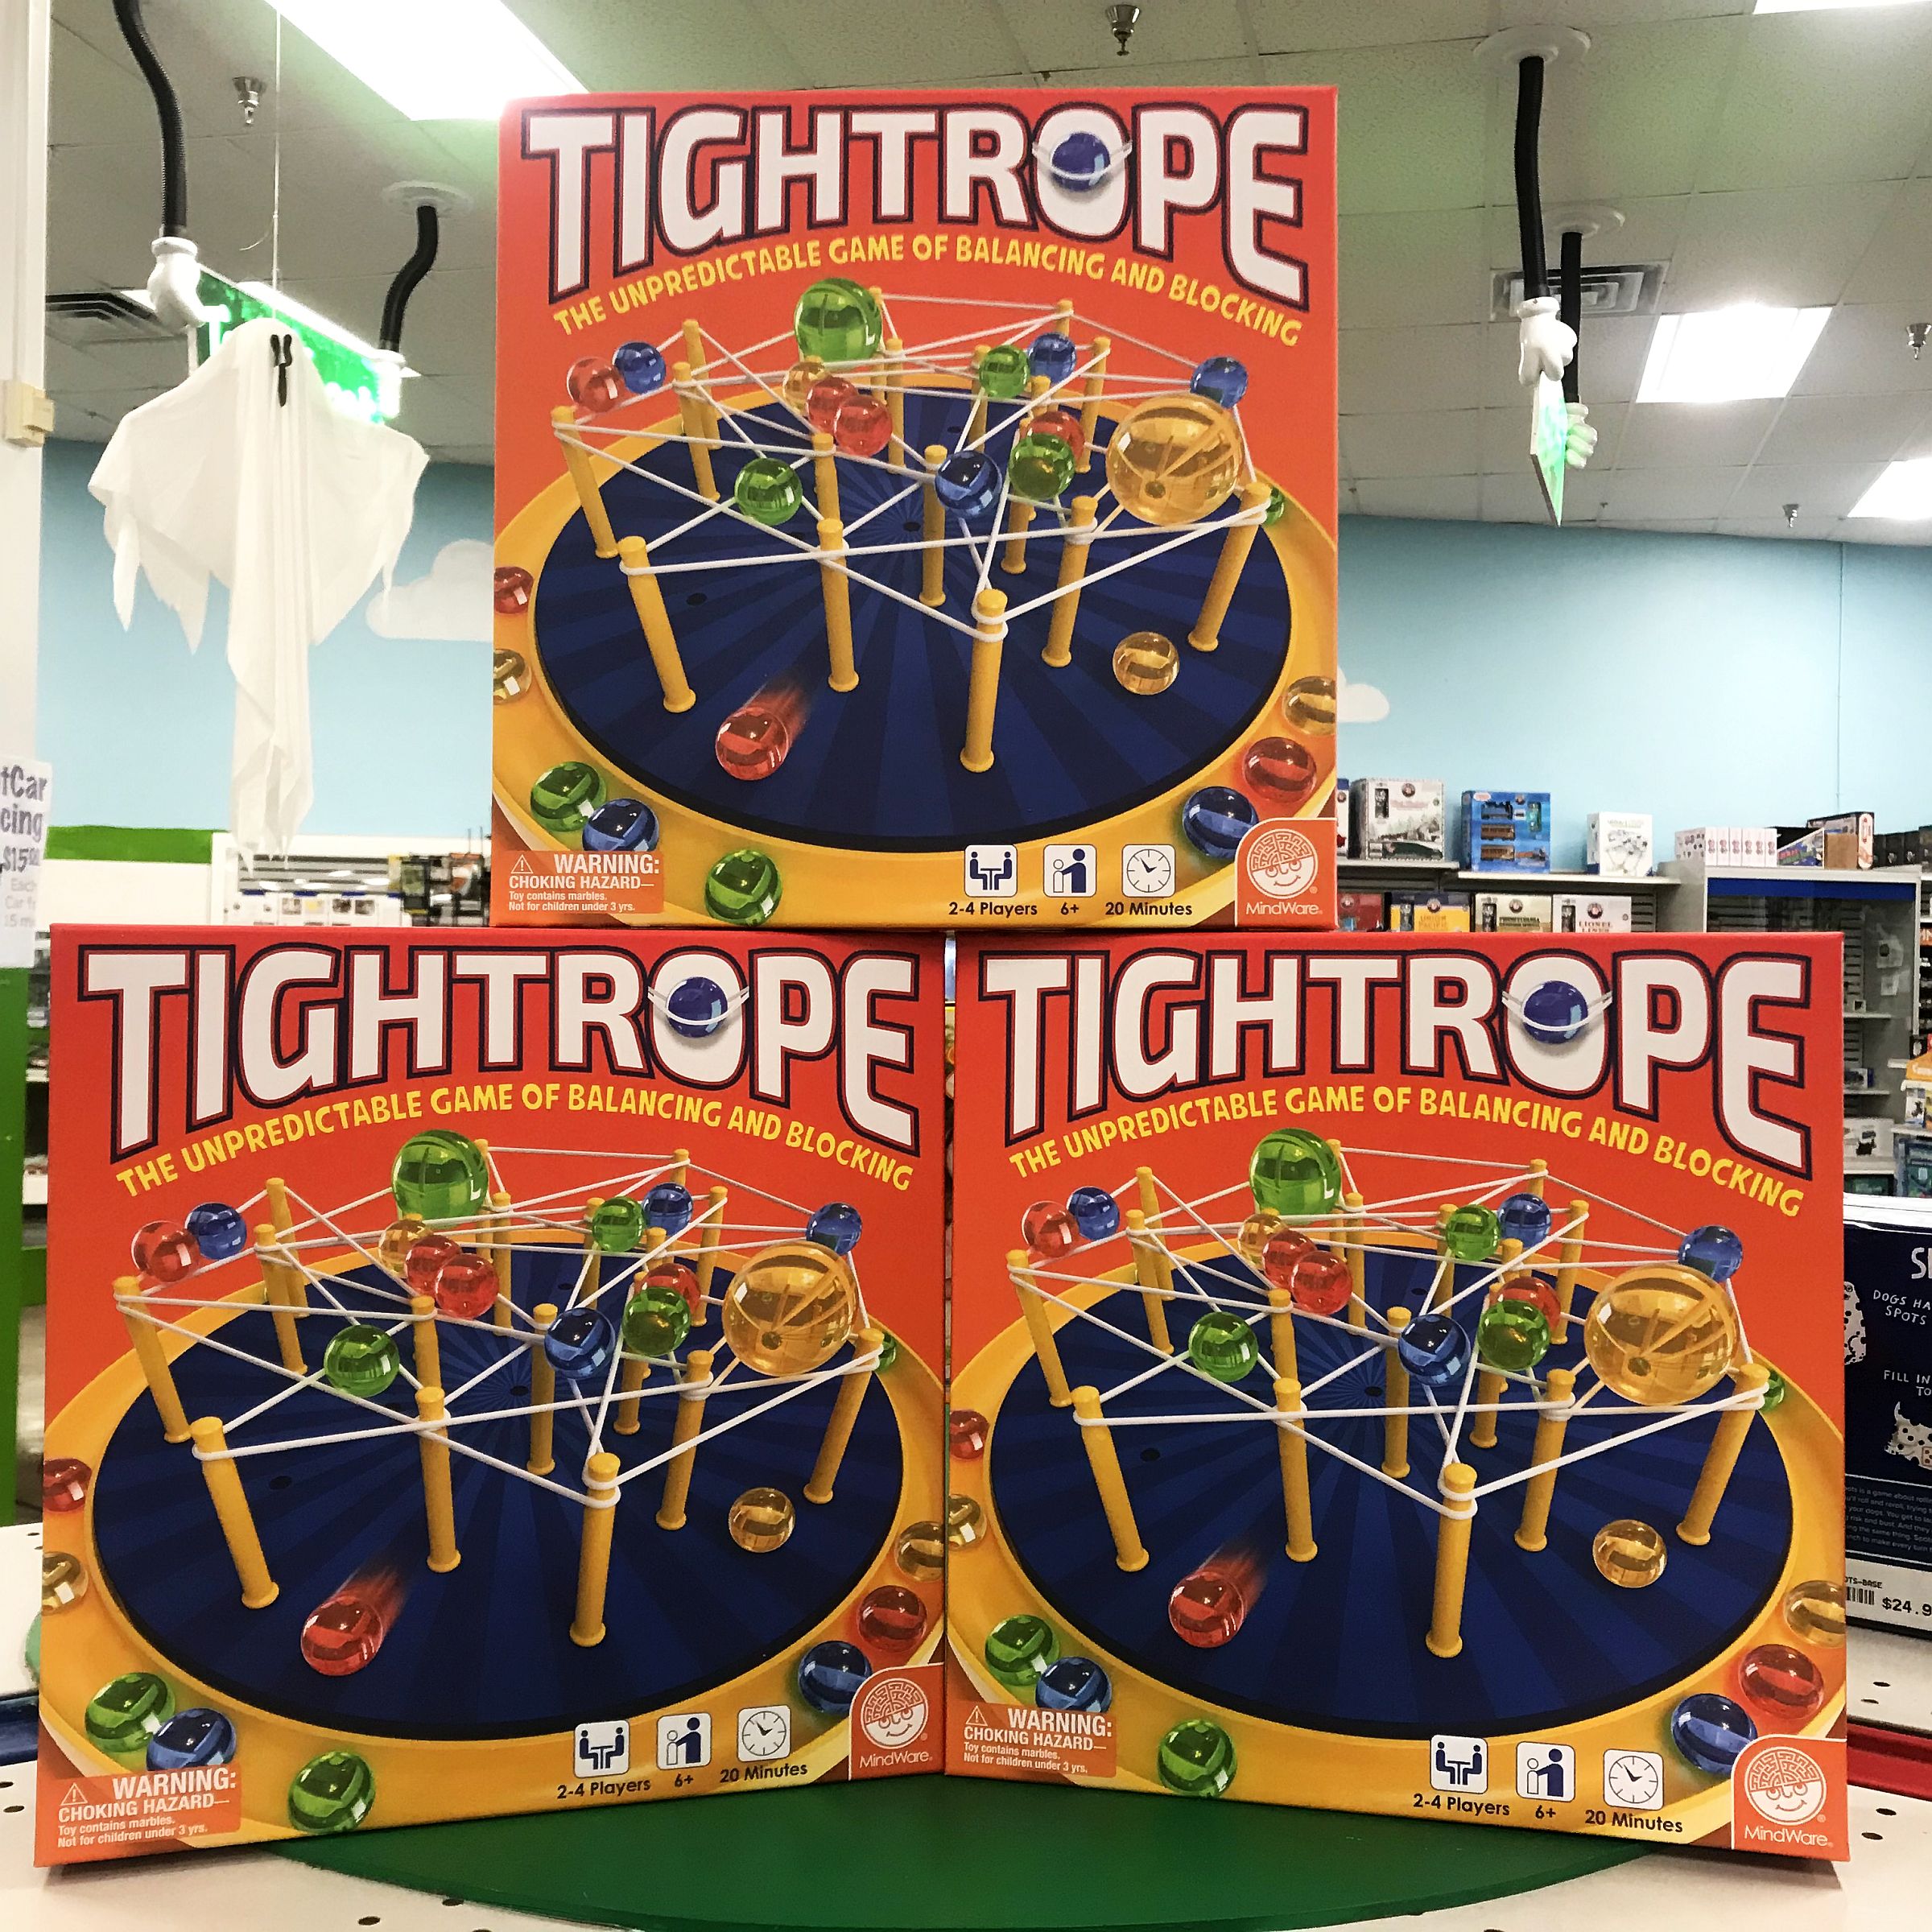 Tightrope-game image